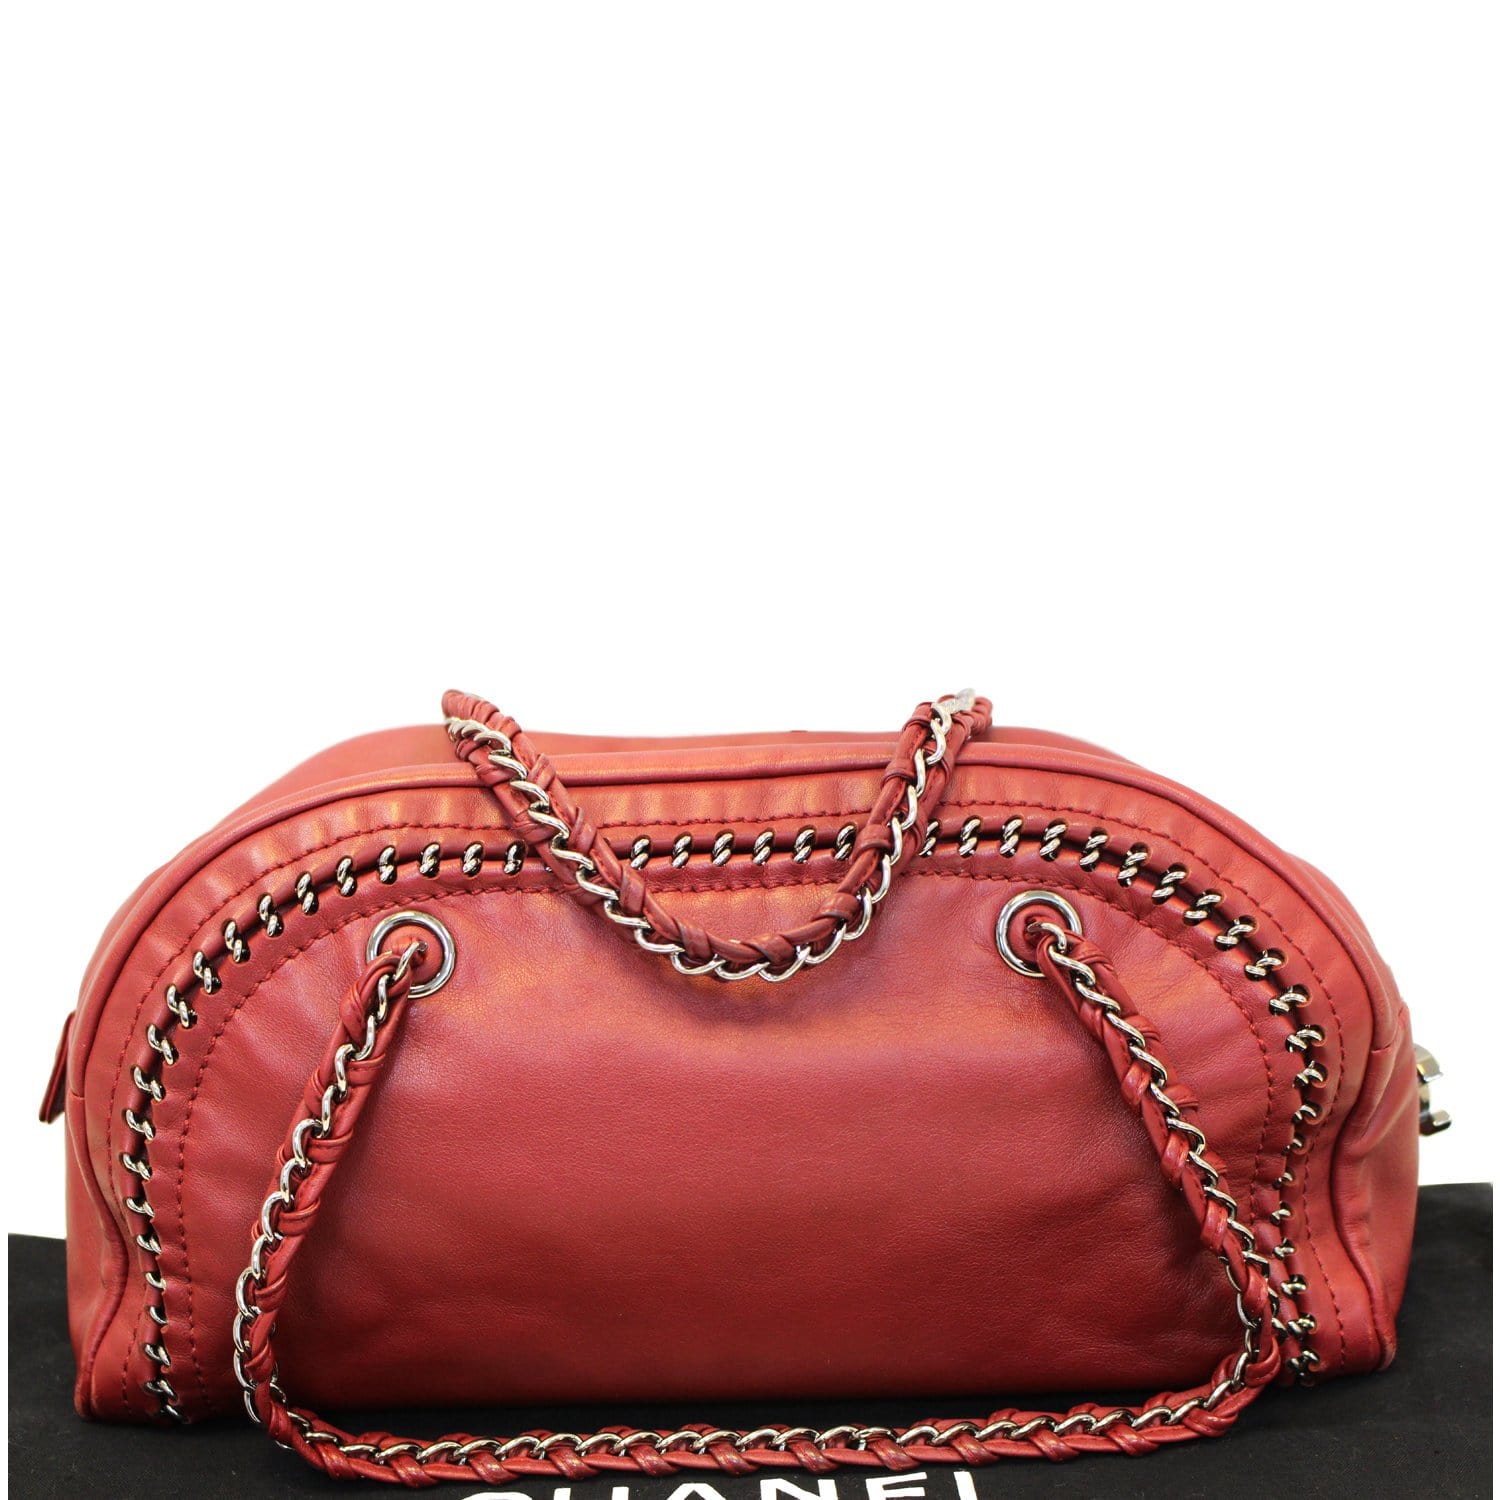 Chanel Smooth Calfskin Petit Luxe Ligne Bowler Satchel Bag Red Us